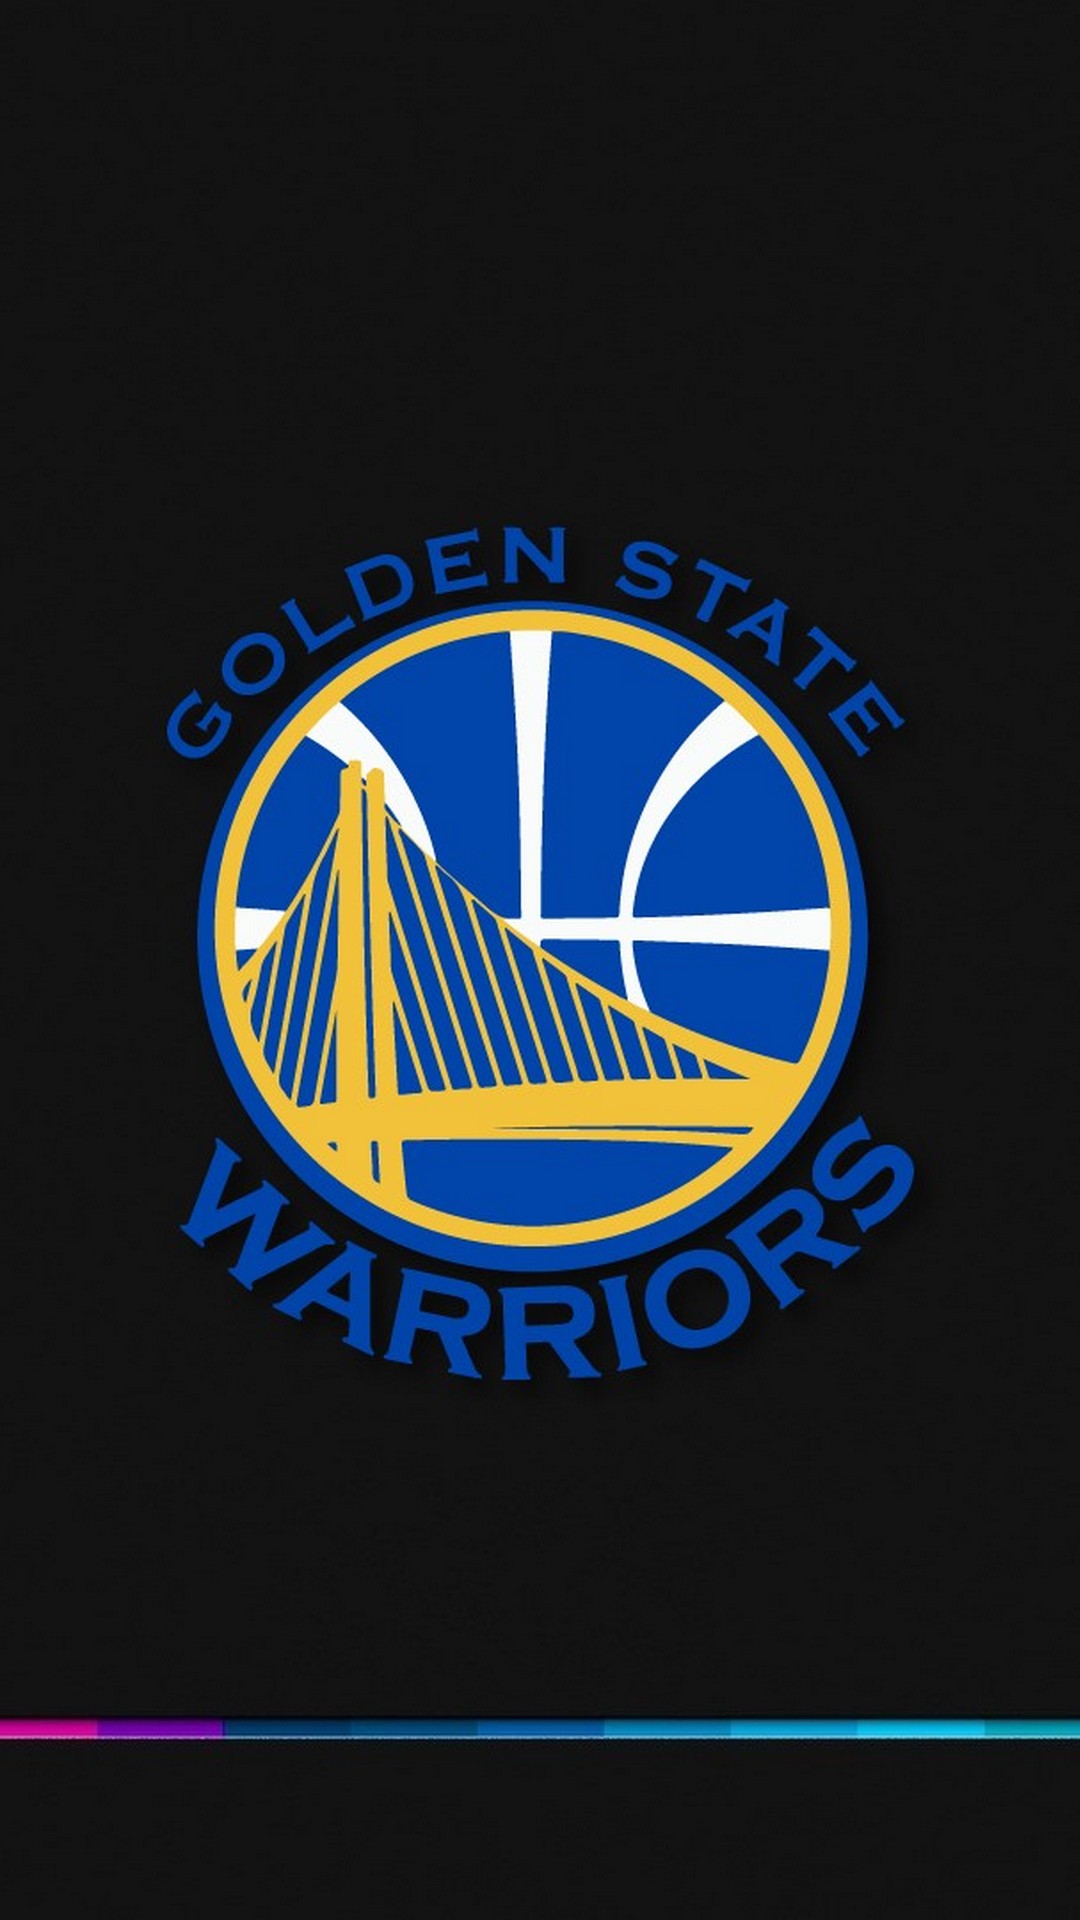 Wallpaper Golden State Warriors iPhone with image dimensions 1080x1920 pixel. You can make this wallpaper for your Desktop Computer Backgrounds, Windows or Mac Screensavers, iPhone Lock screen, Tablet or Android and another Mobile Phone device